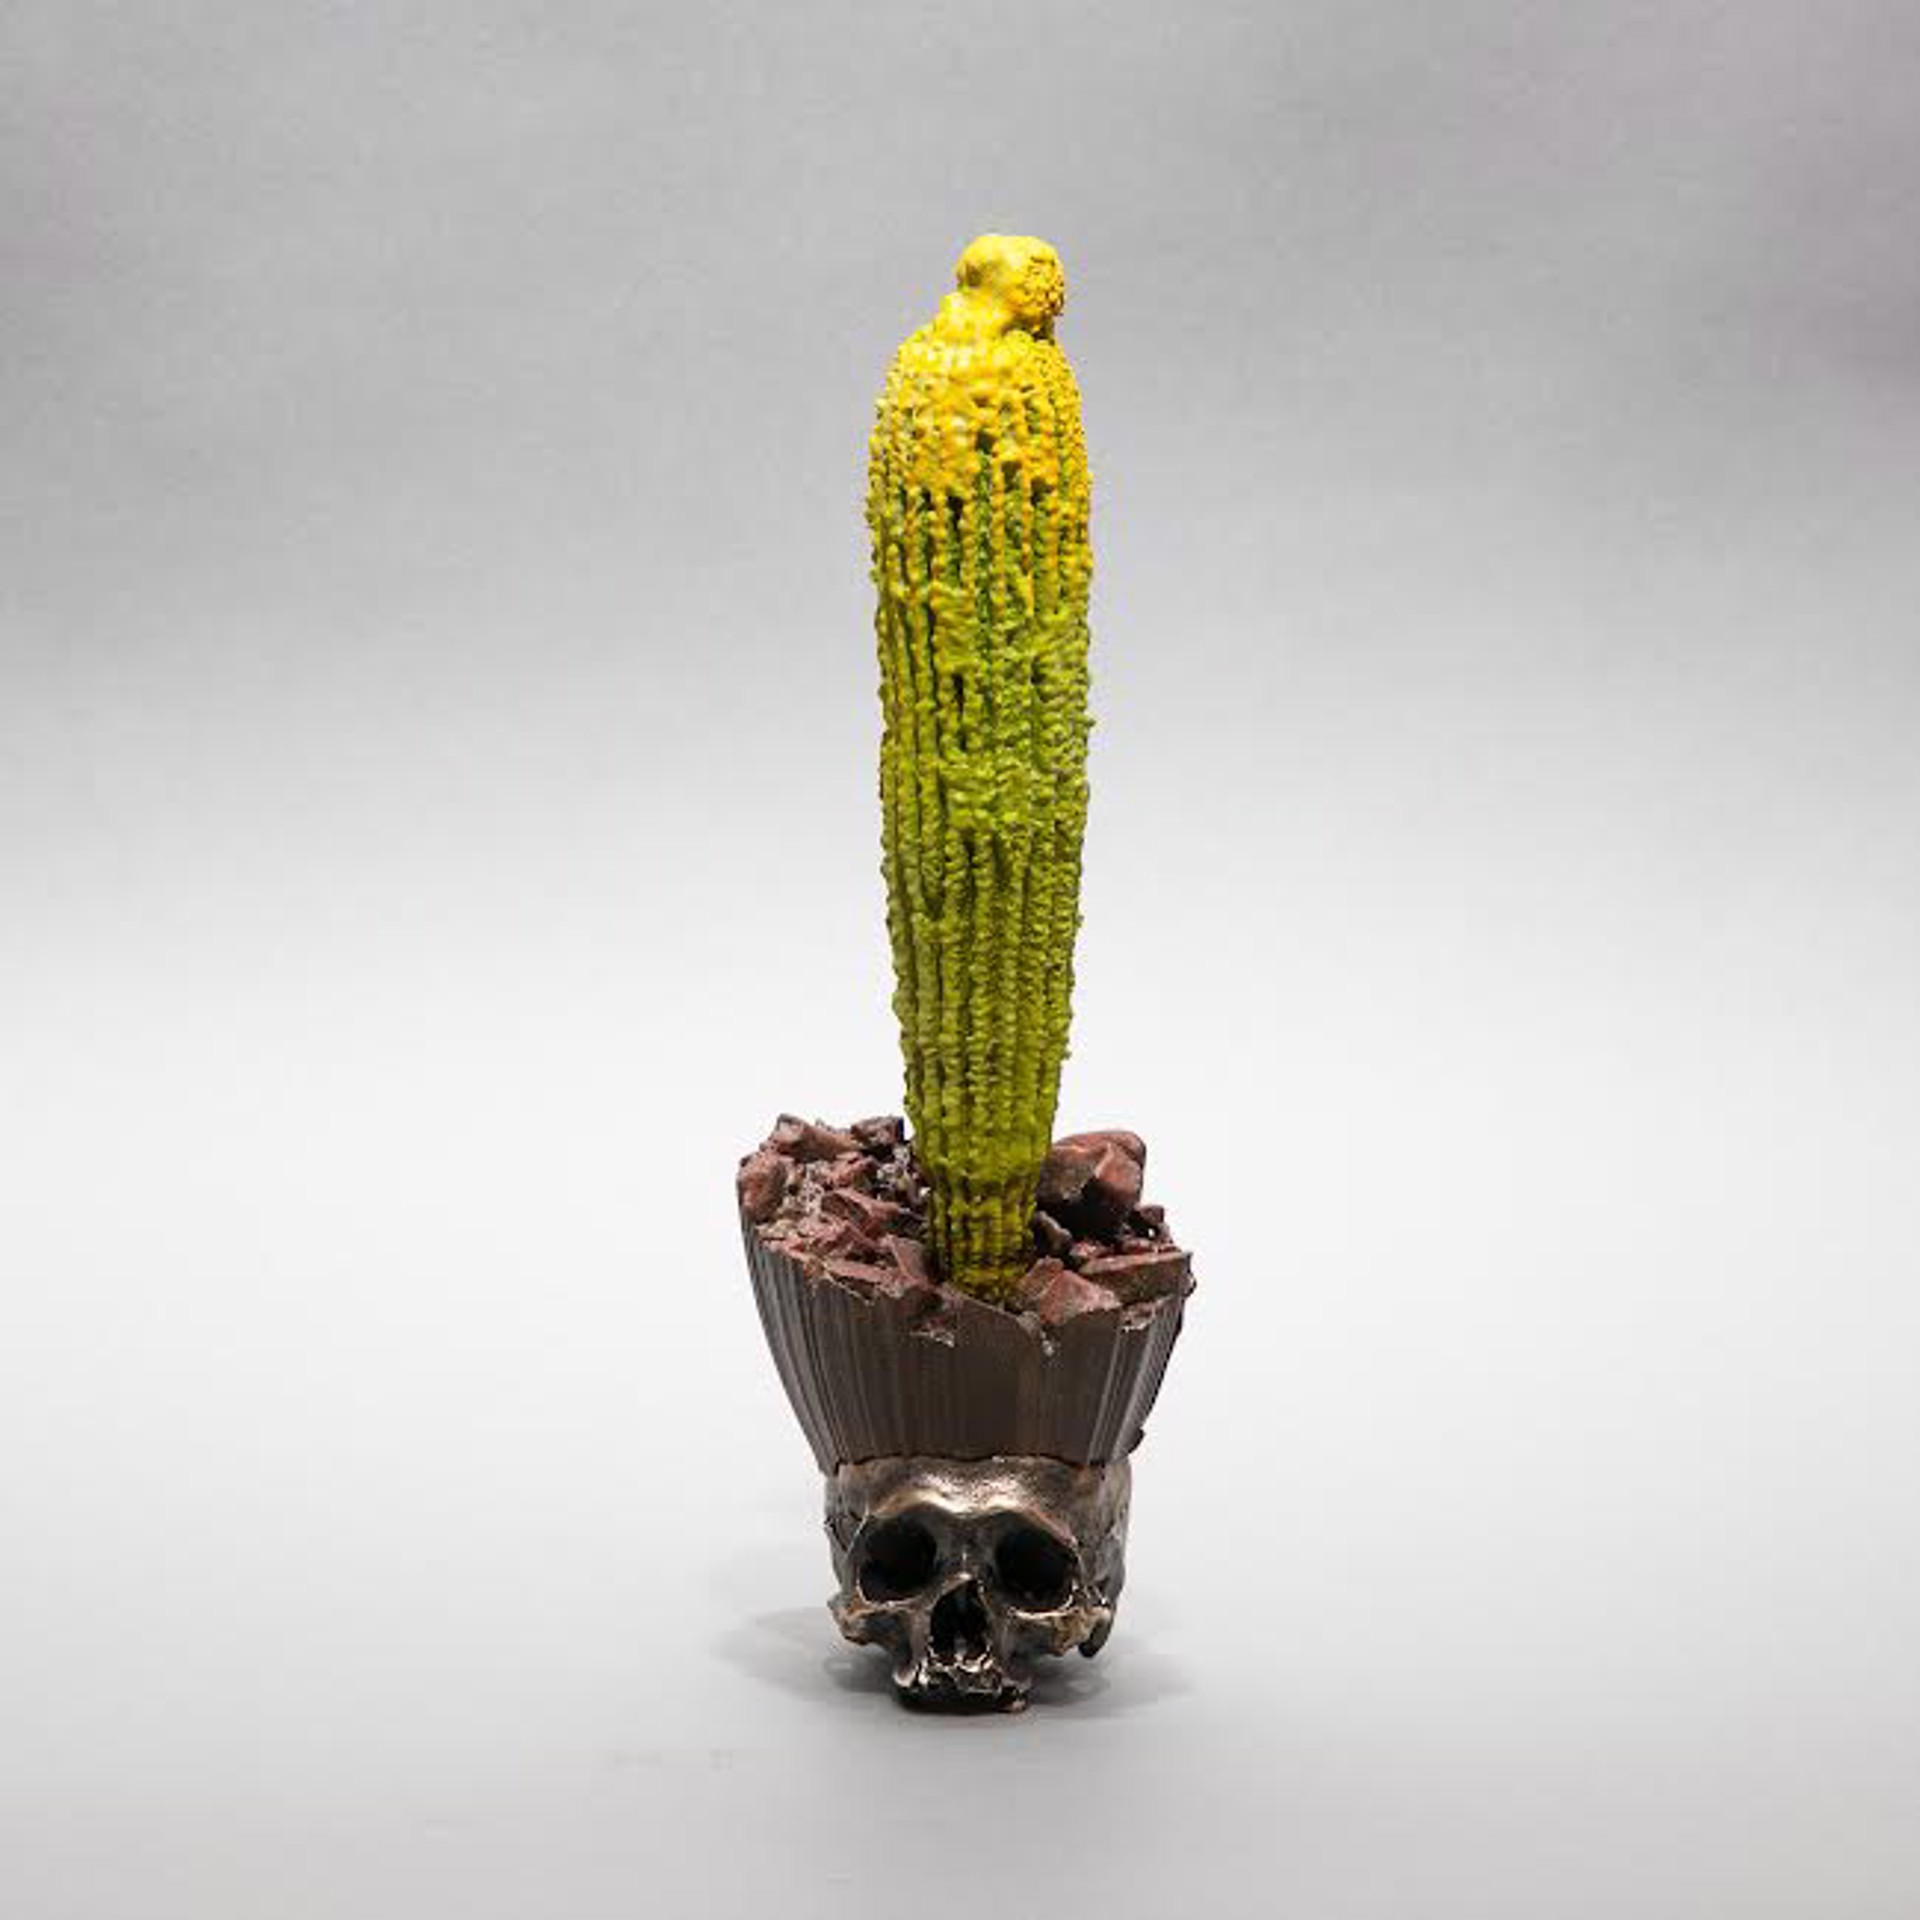 "Cactus Skull 6" by Dana Younger